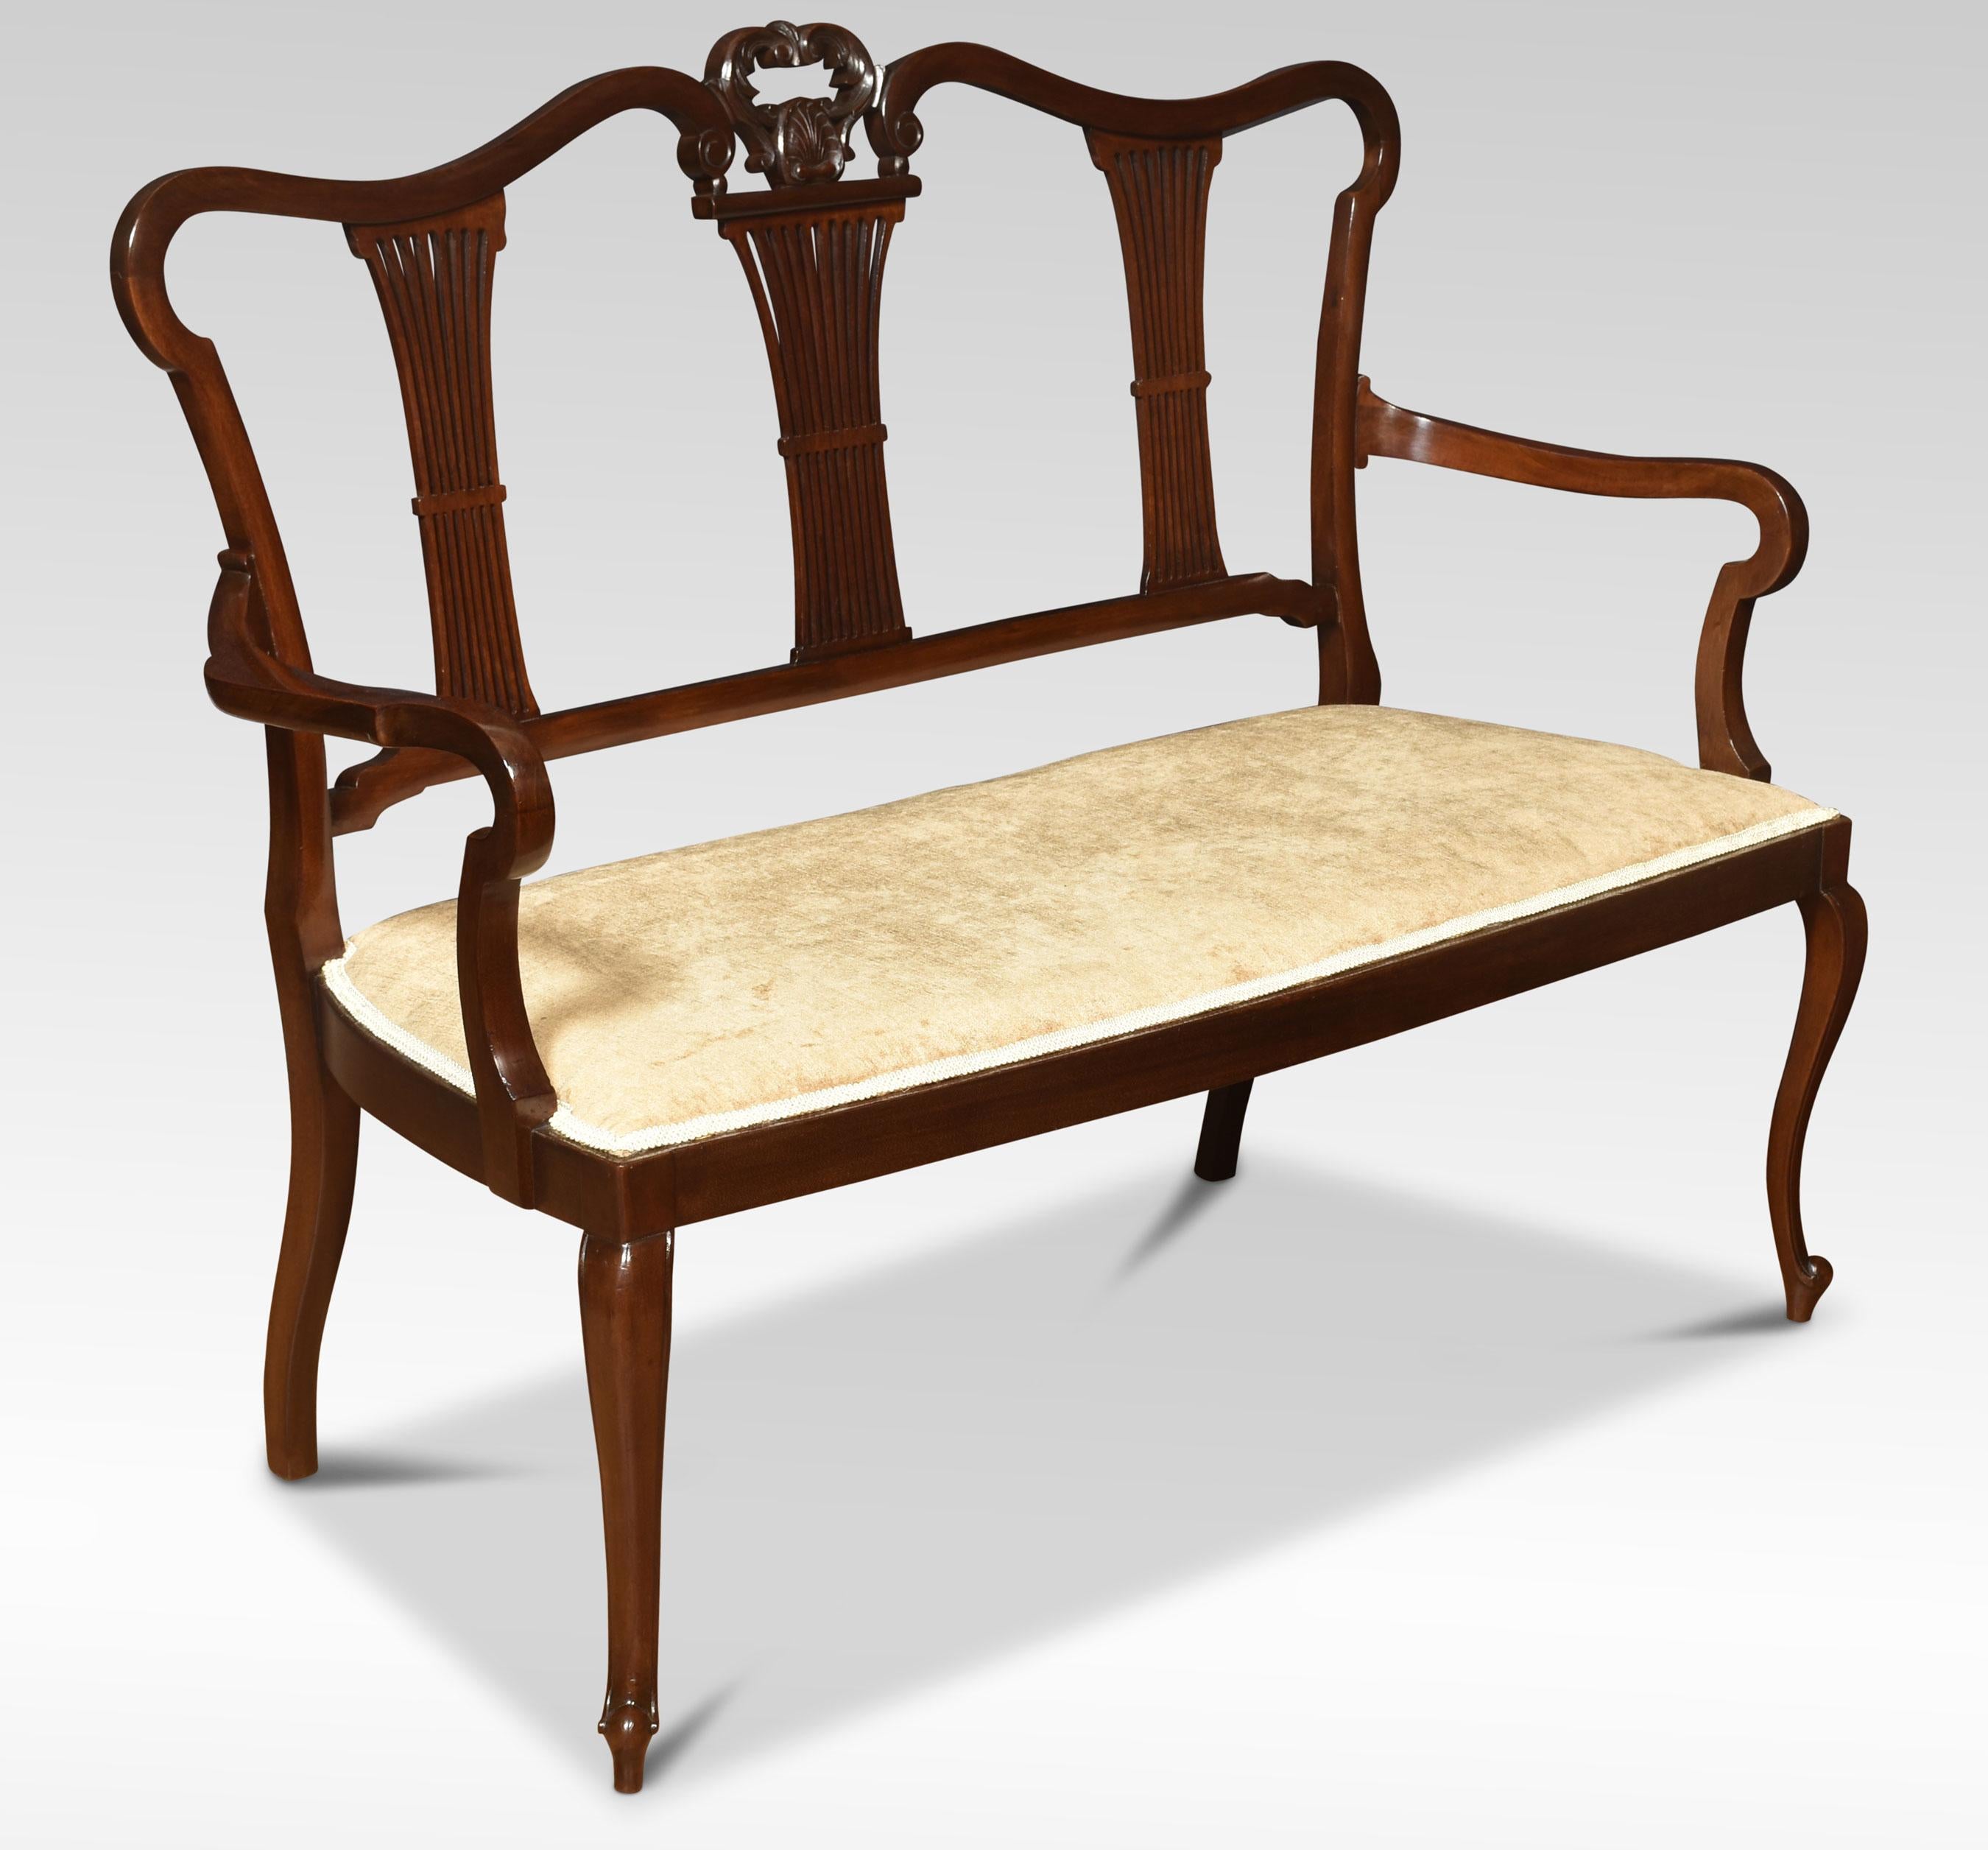 Two seater mahogany settee, having three-part splat back to the upholstered seat enclosed by scrolling arms raised up on cabriole front legs.
Dimensions
Height 36.5 Inches height to seat 17 Inches
Length 47 Inches
width 23.5 Inches